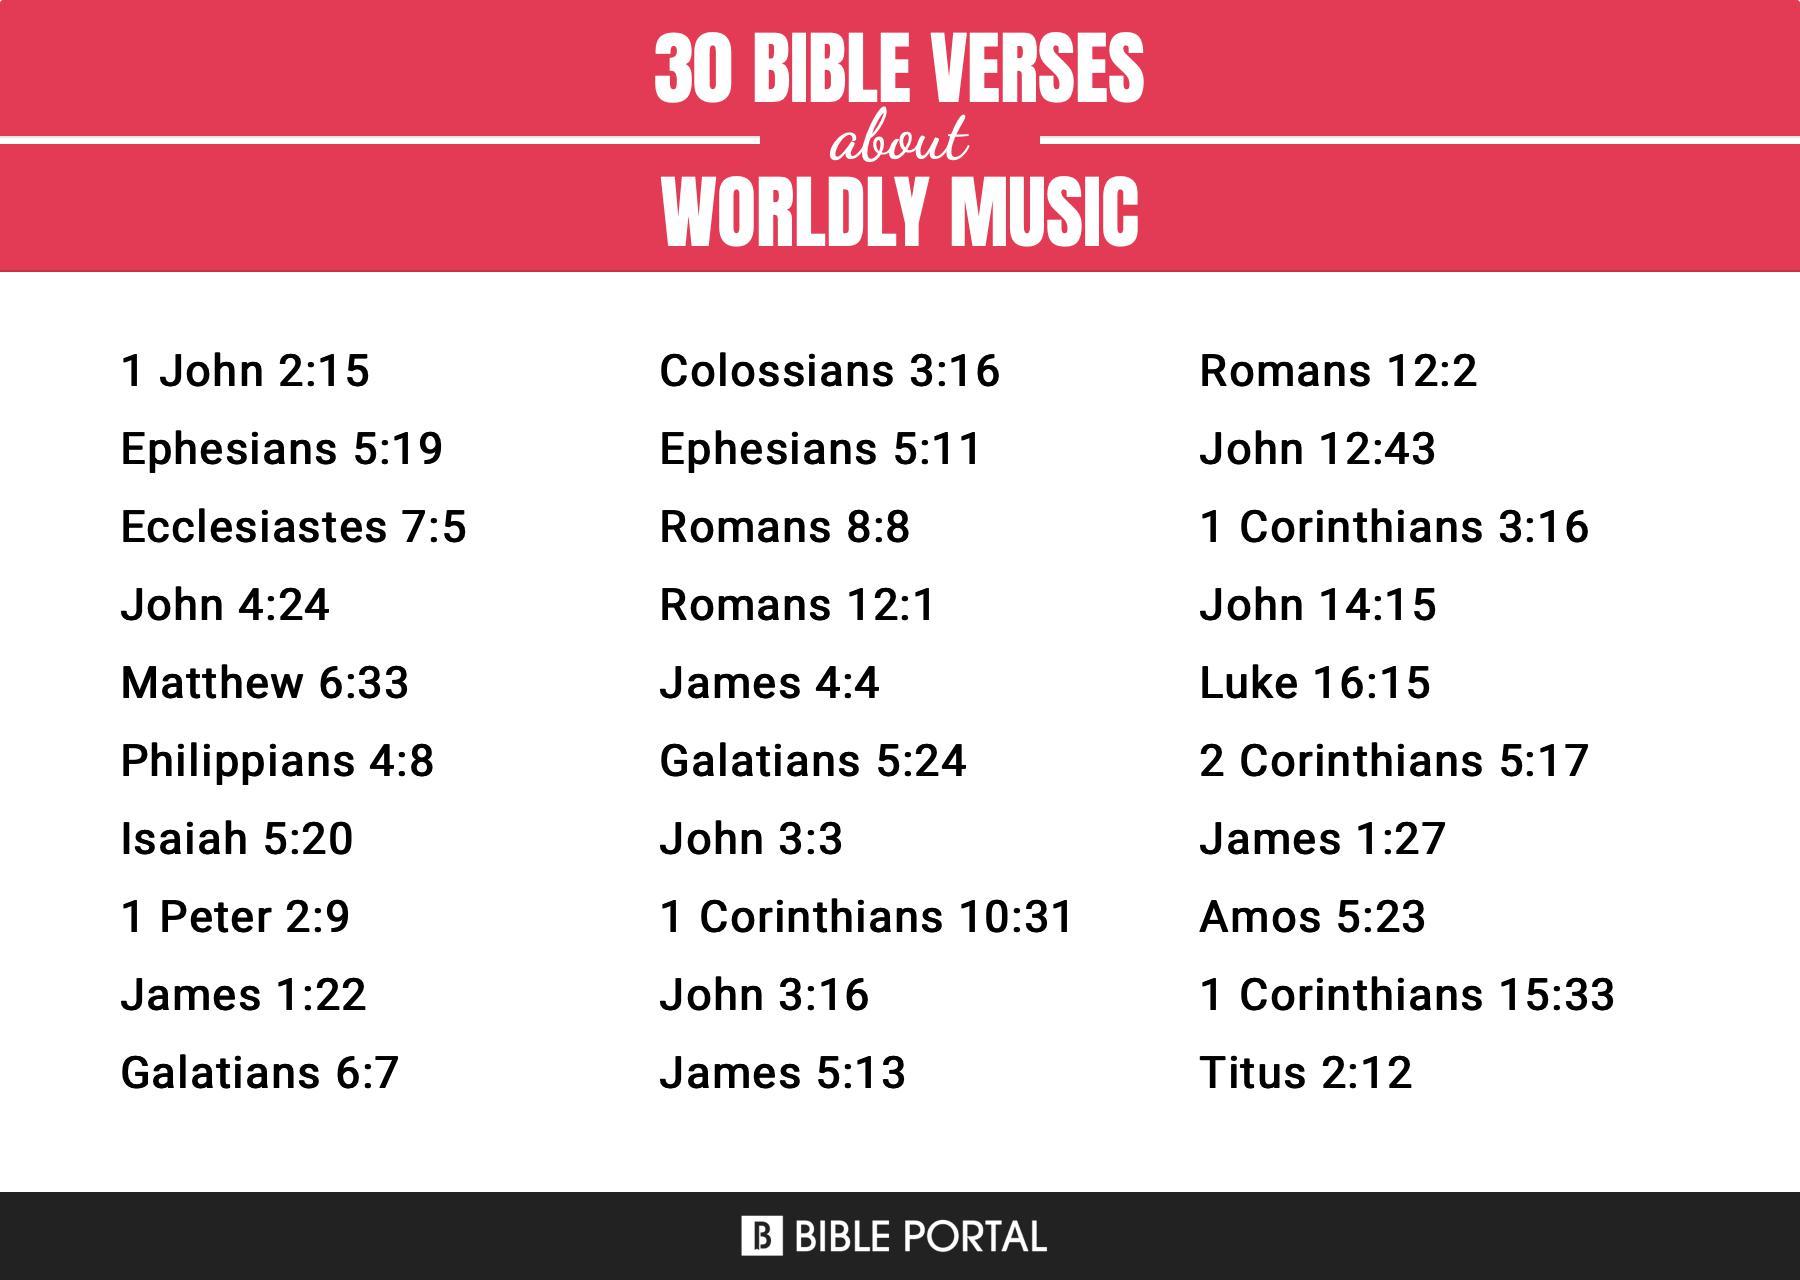 66 Bible Verses about Worldly Music